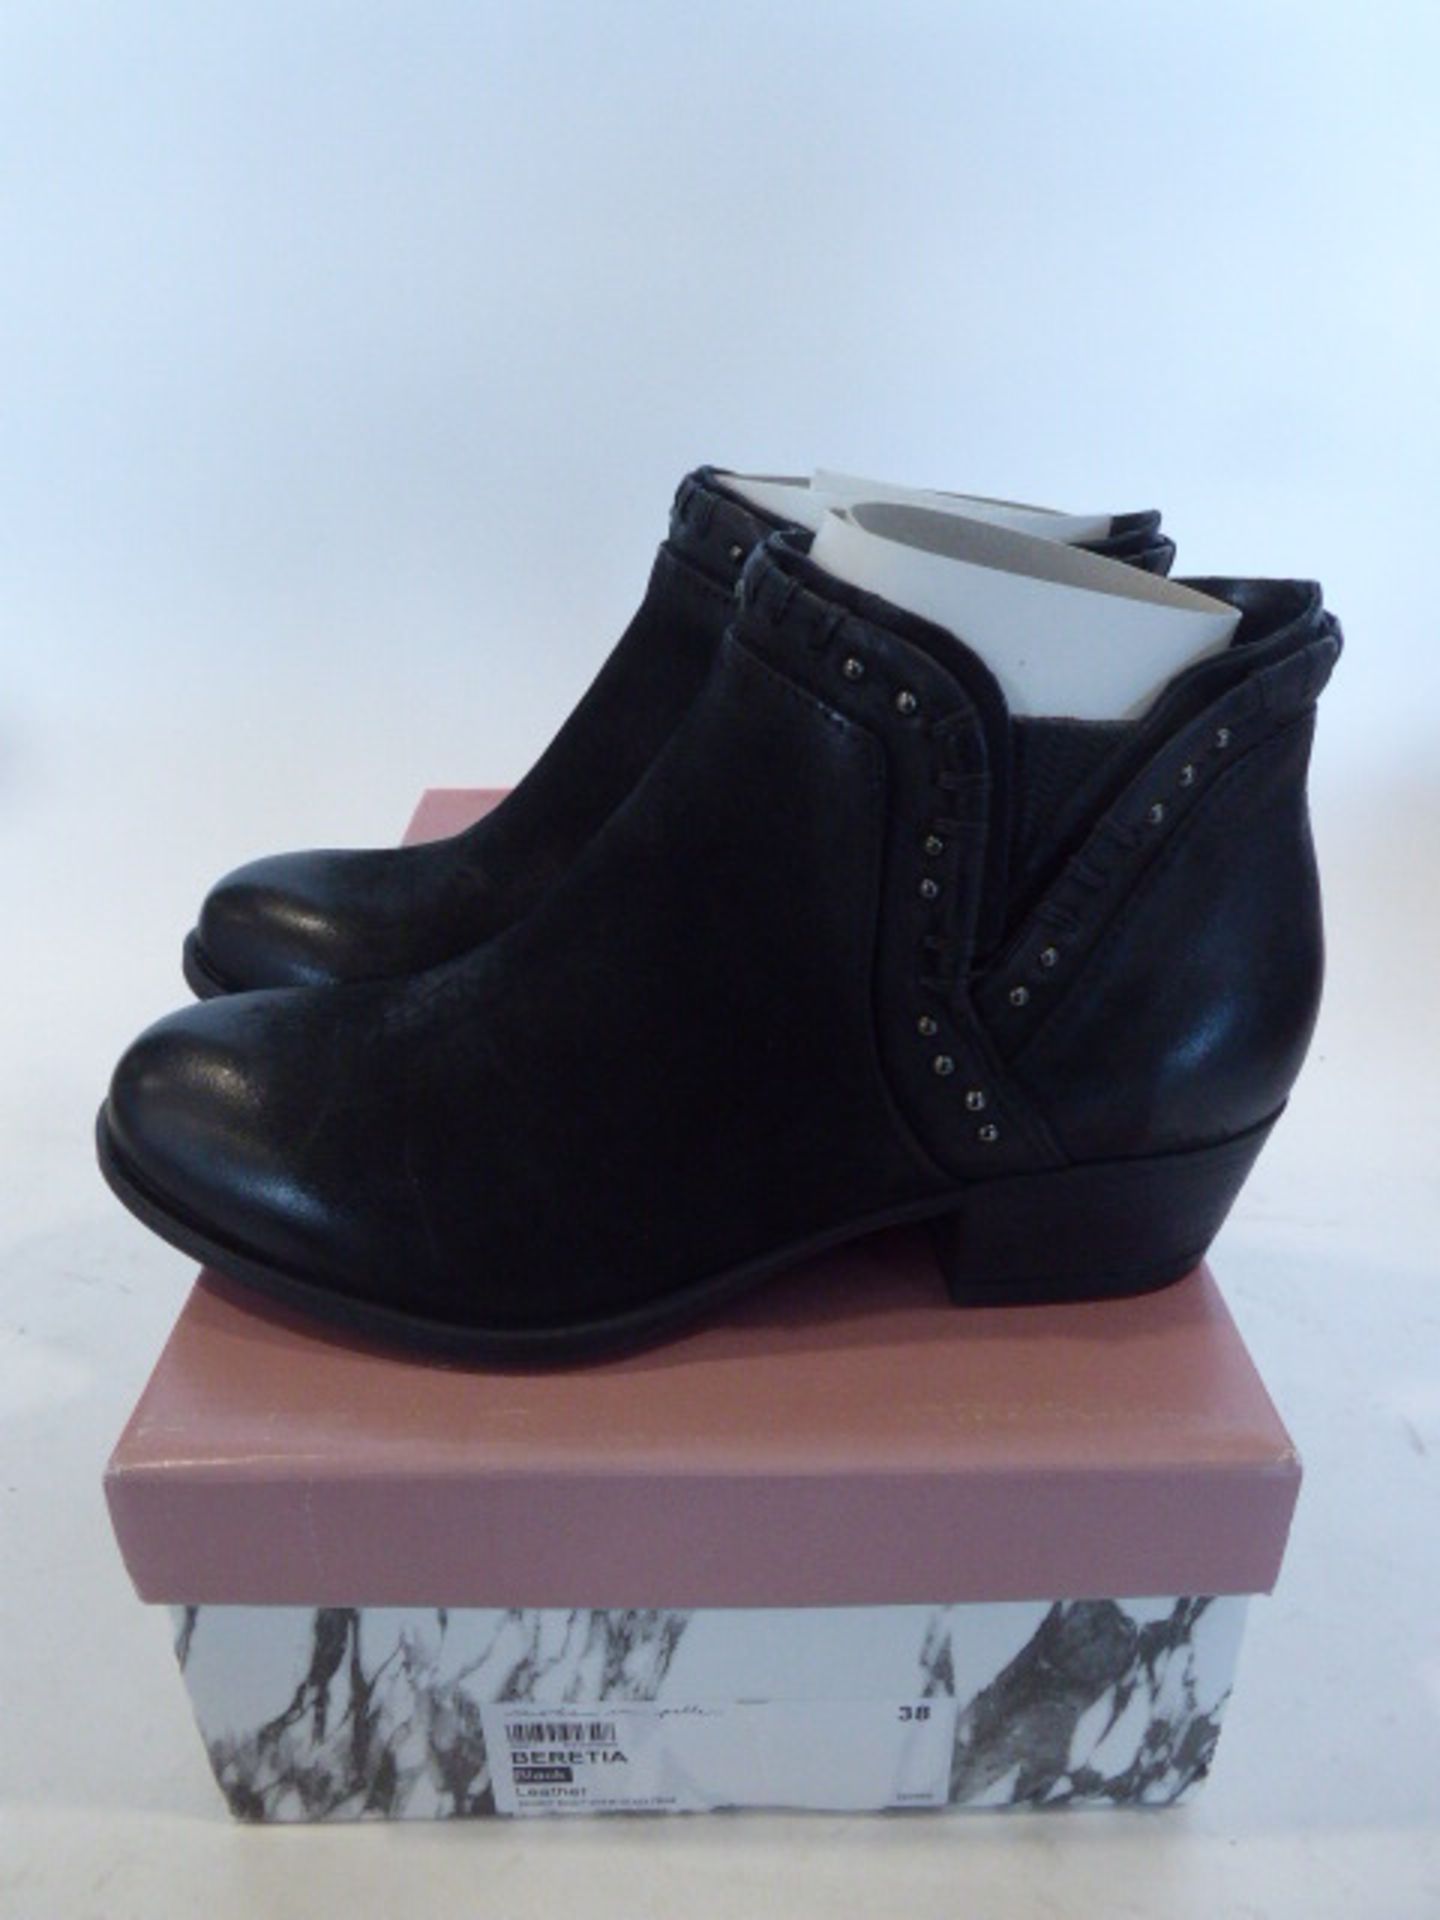 2 pairs of Moda in Pelle Beretia boots sizes EU 38 and 39 - Image 2 of 5